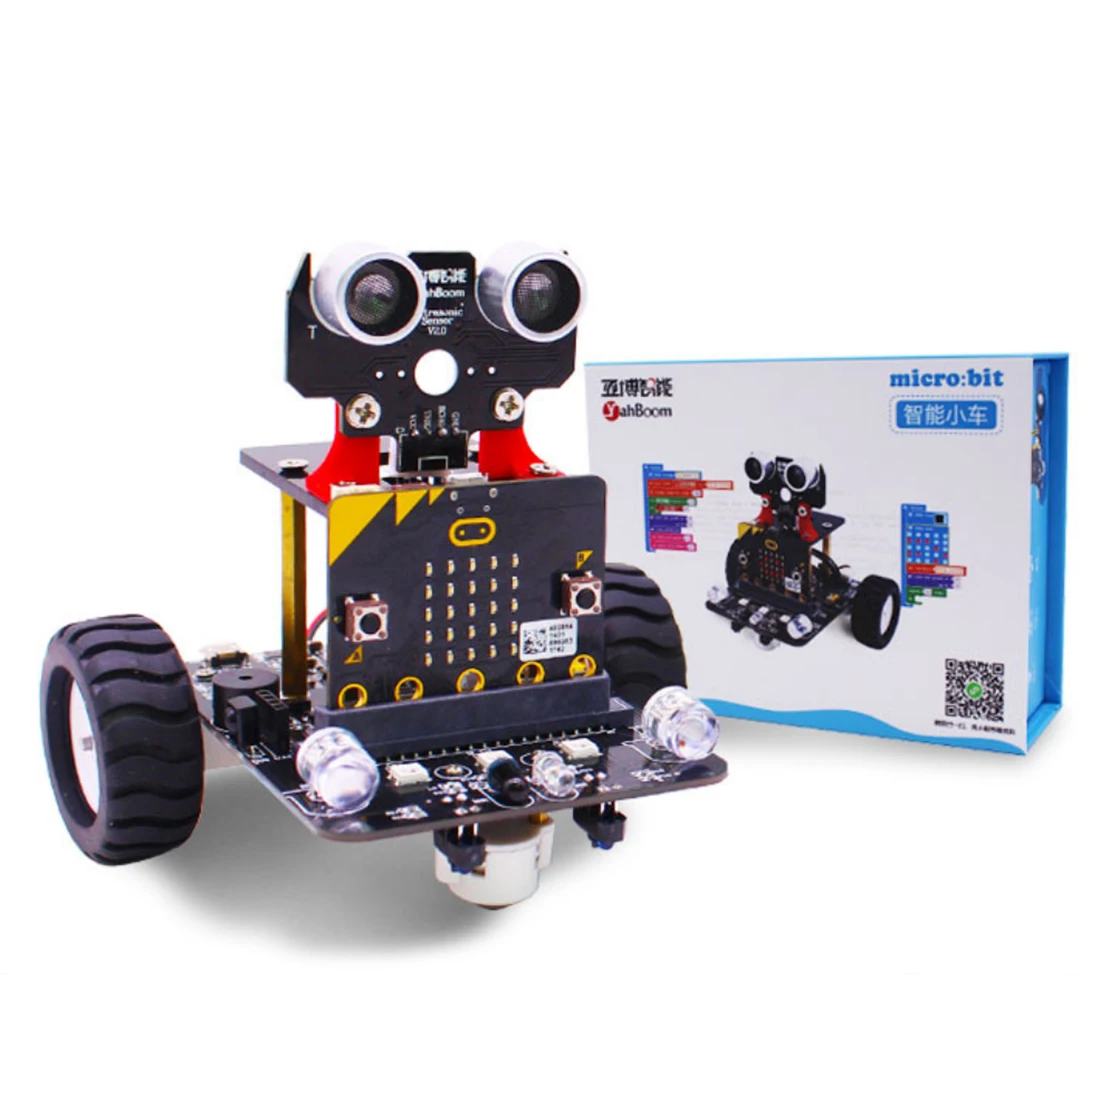 Graphical Programmable Robot Car with Bluetooth IR and Tracking Module Steam Robot Car Toy for Micro:bit BBC (Without Mainboard)